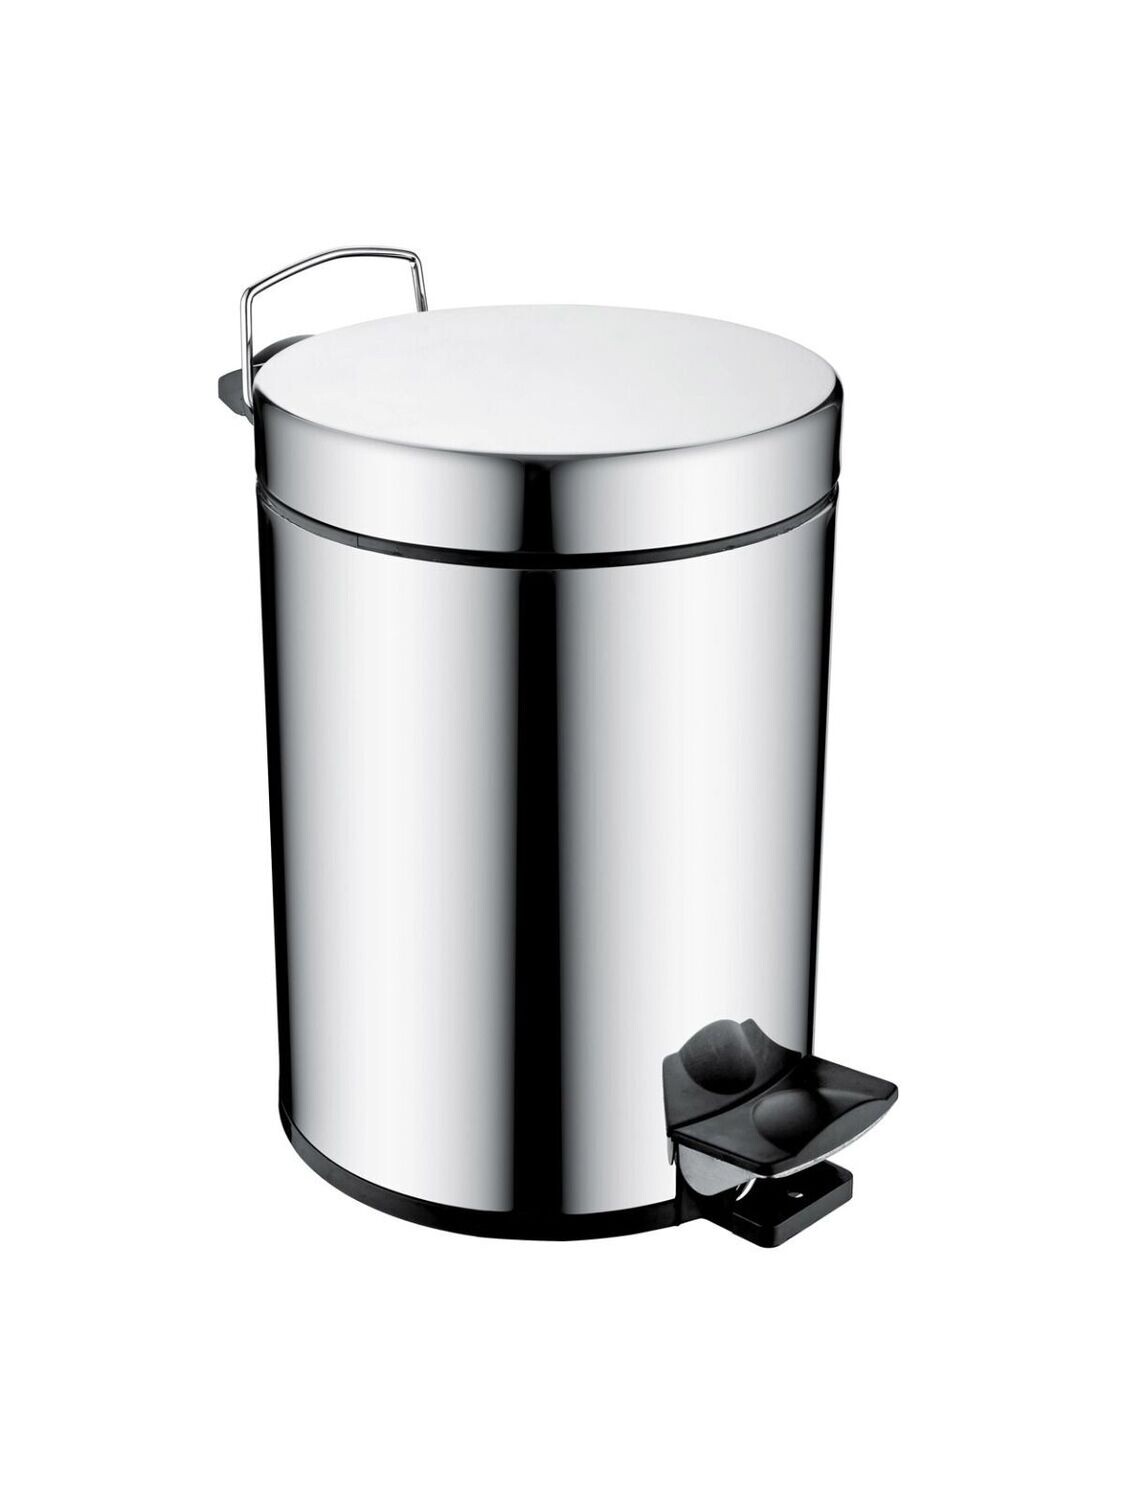 Bon appetit 30L stainless steel Pedal bin Chrome30L Bathroom, Bedroom, Office, Mini Garbage can with Foot Pedal for Small Space,